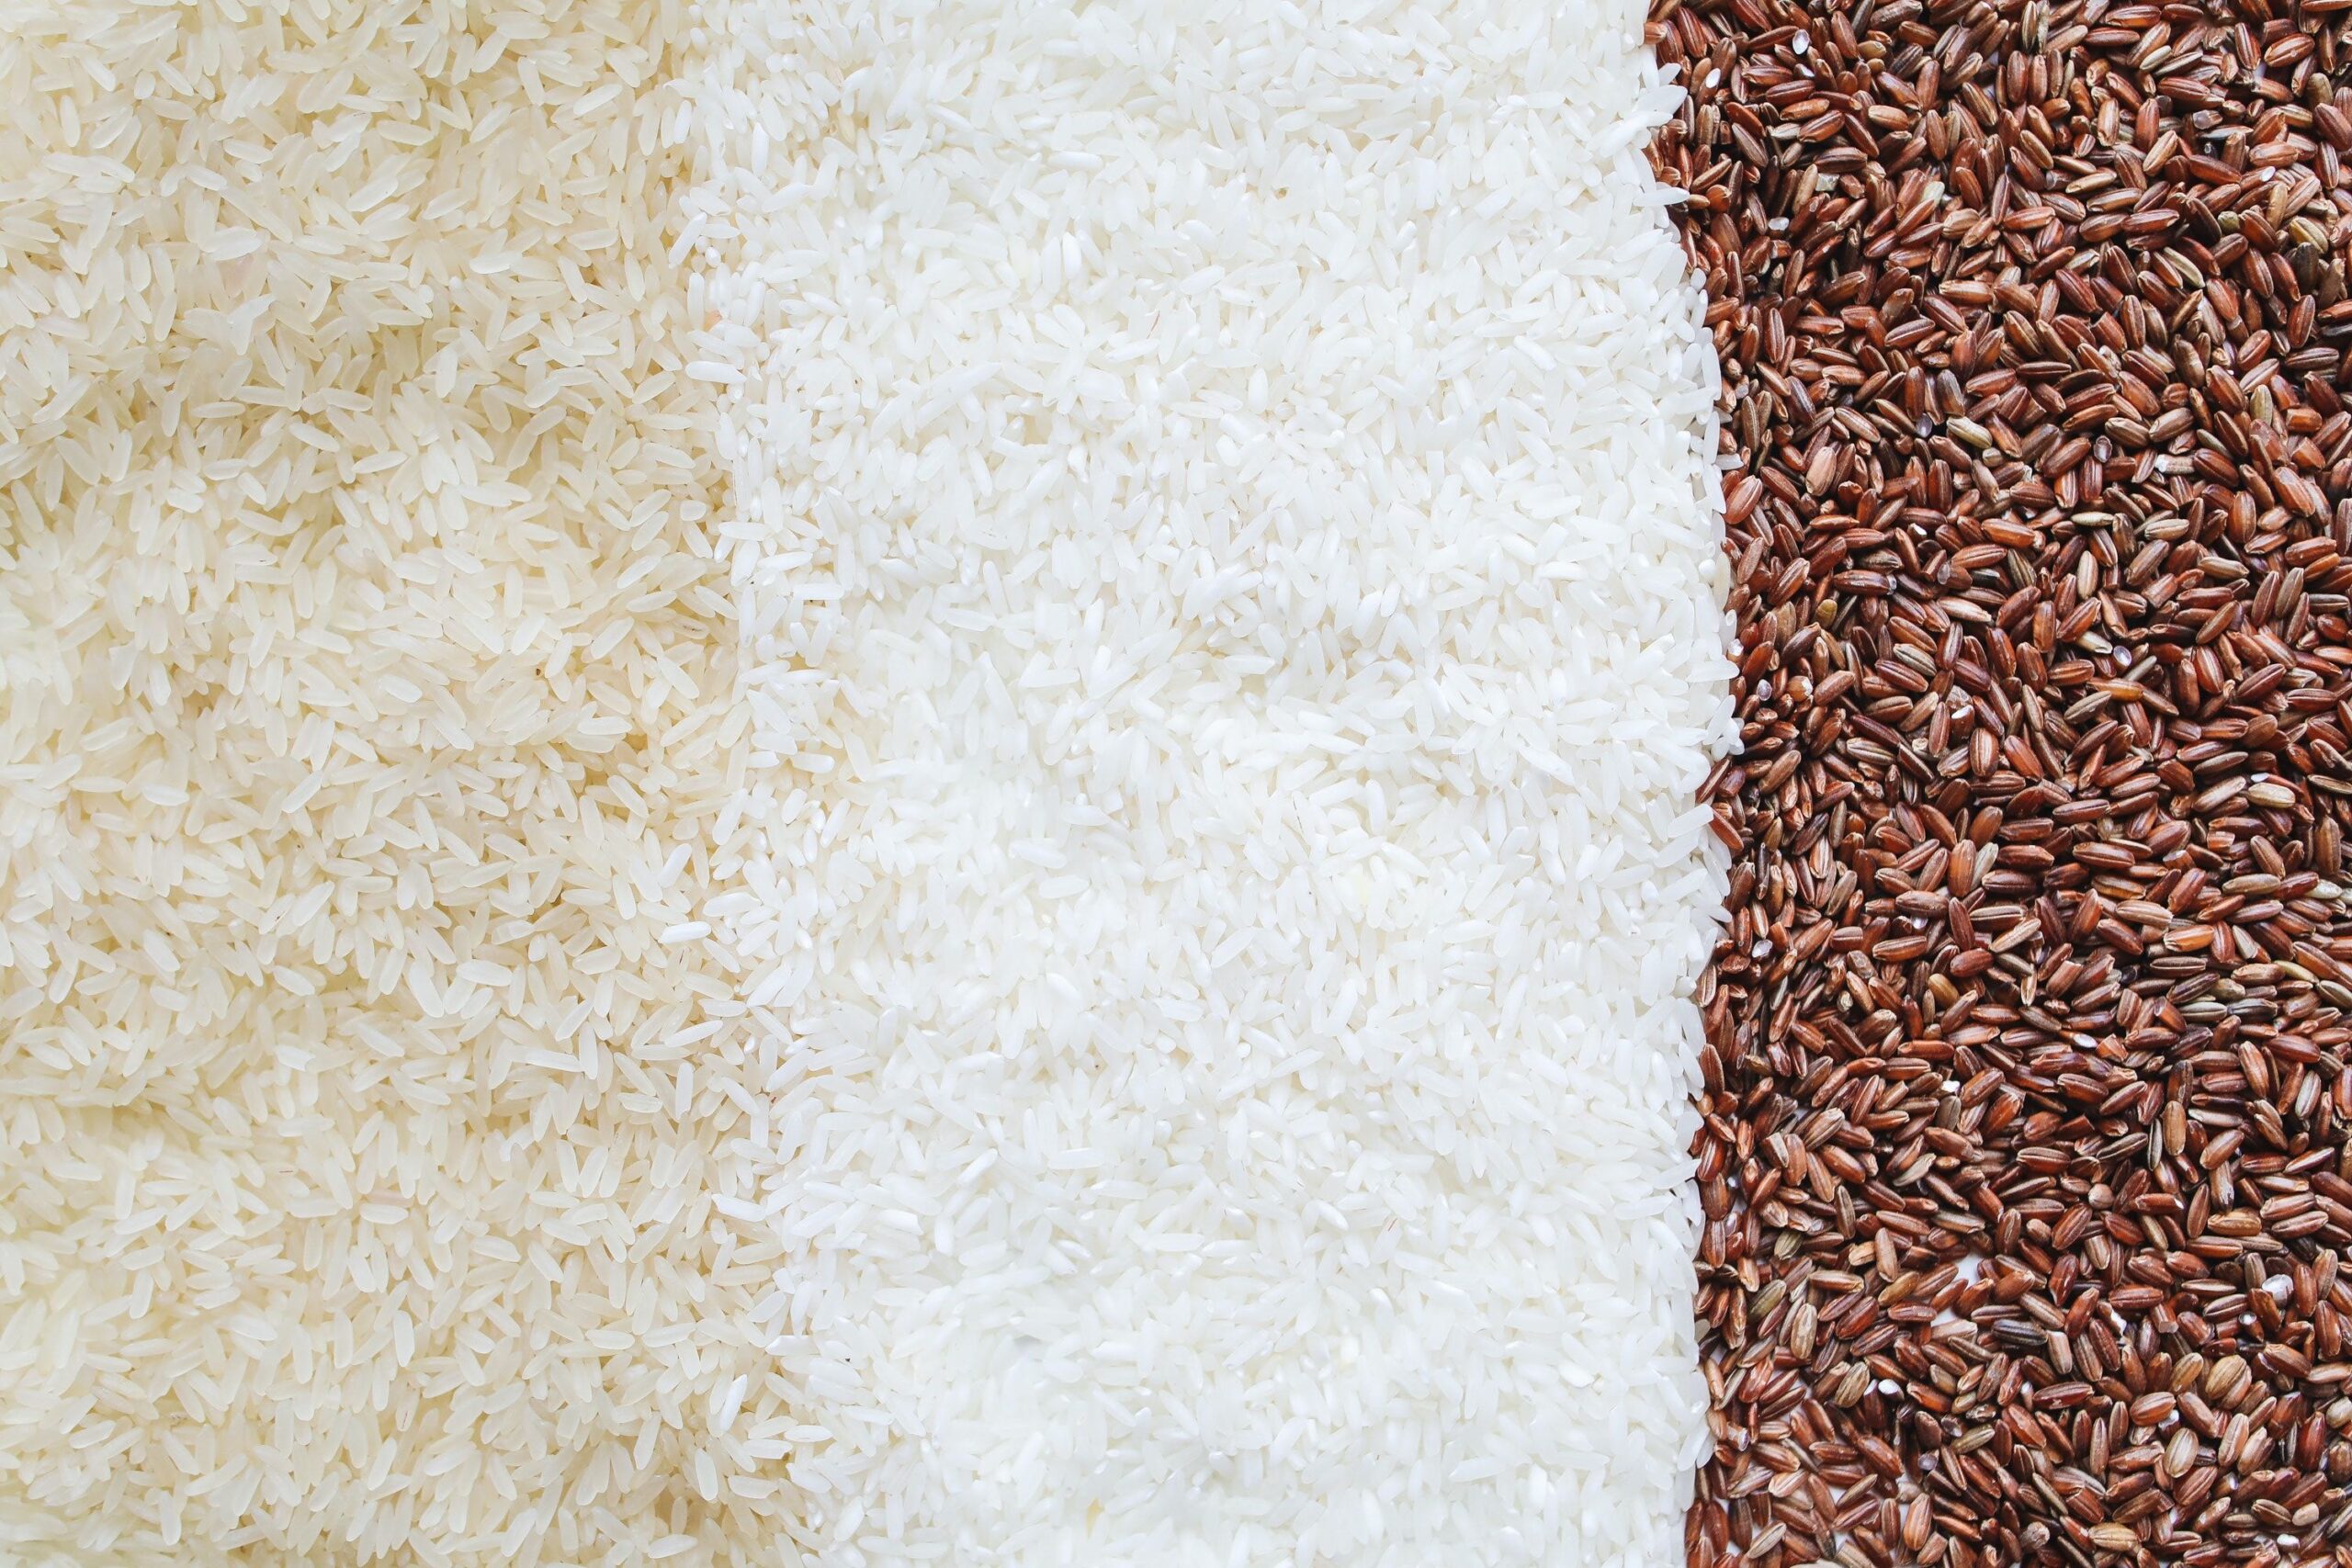 Analyzing the Relative Riskiness of Rice Yields